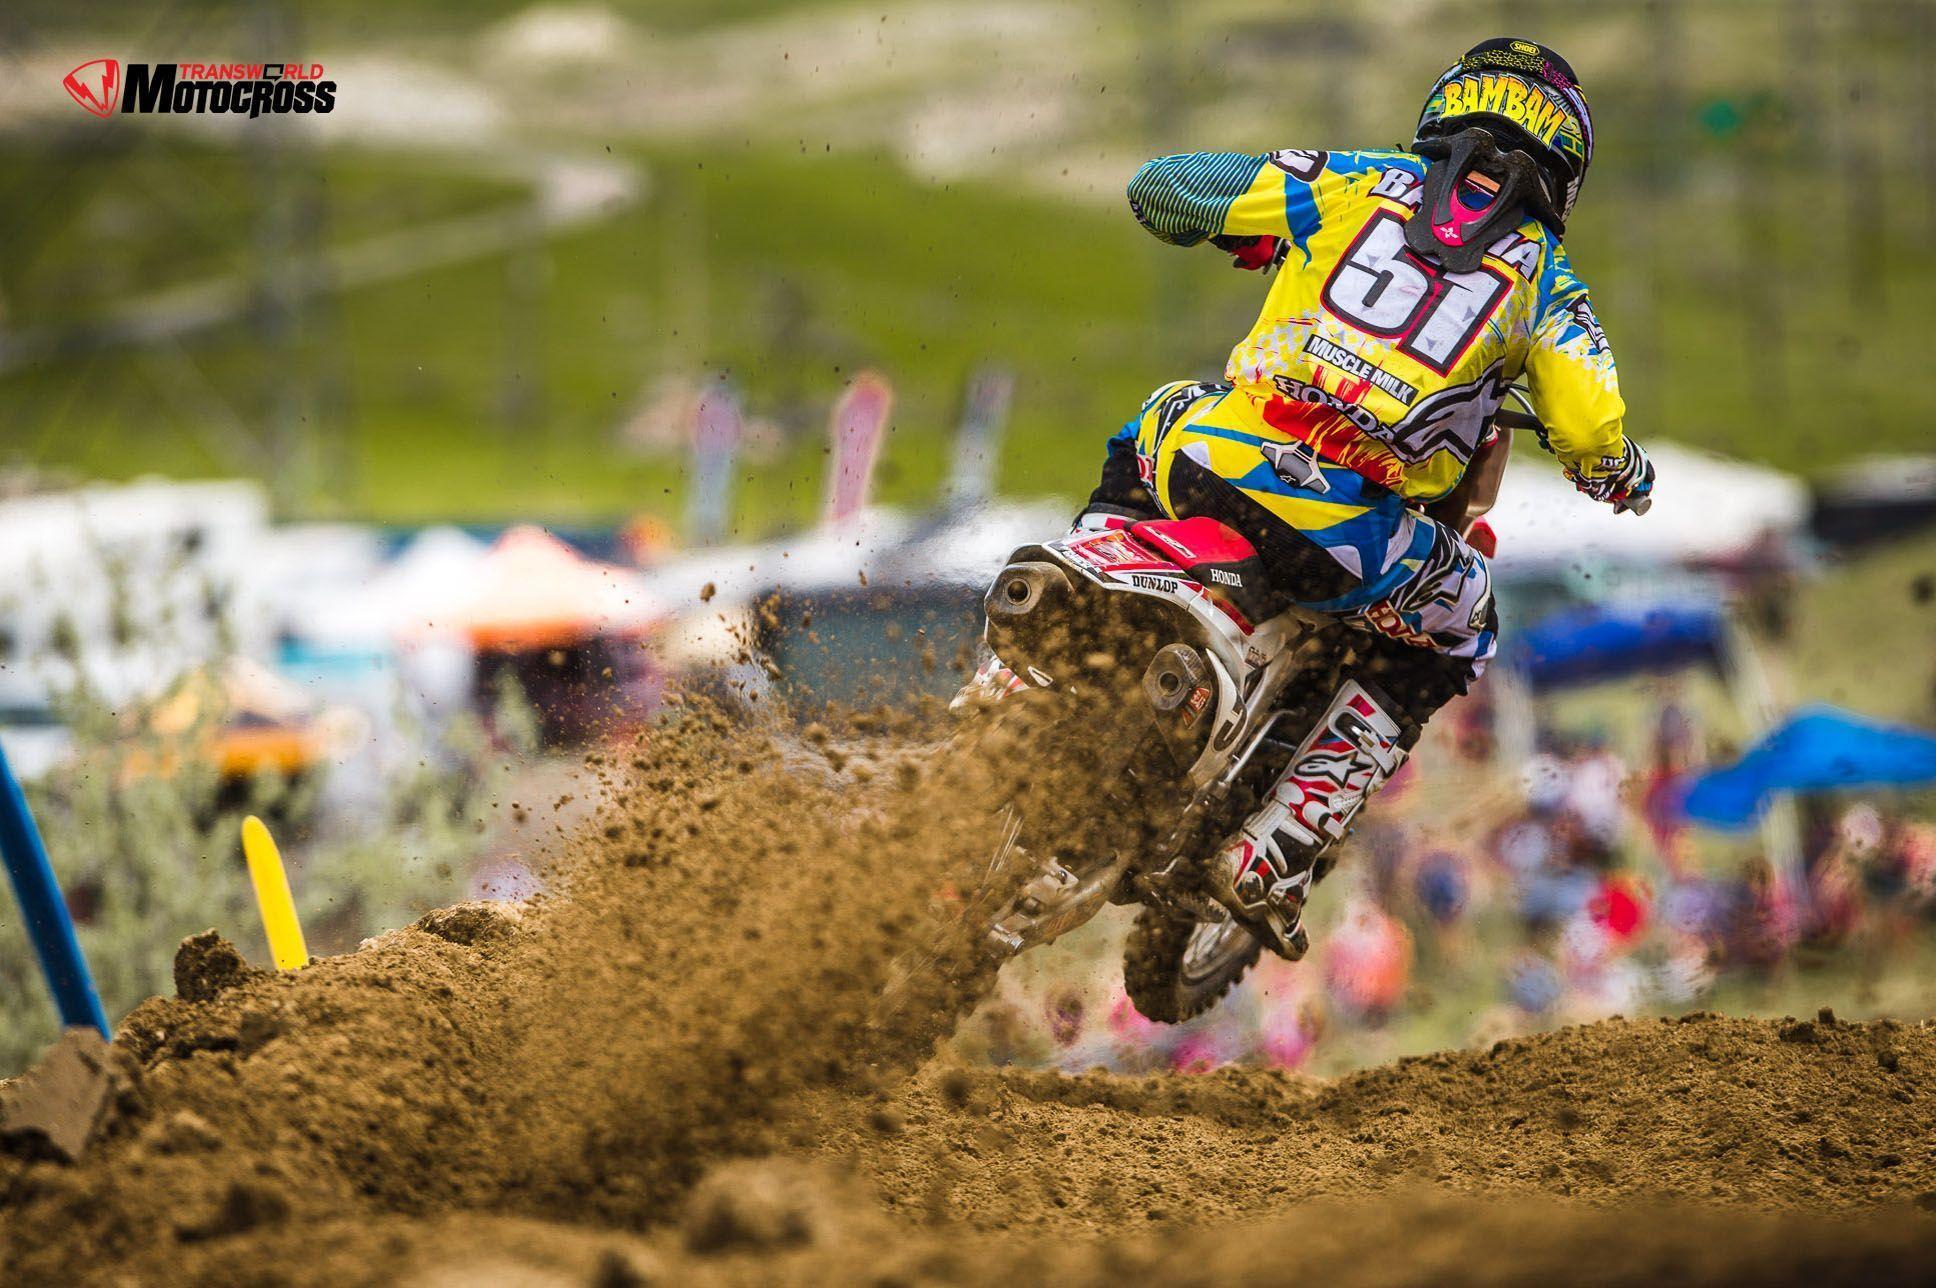 Moto In The Mountains: Thunder Valley 2013 Wallpaper. TransWorld